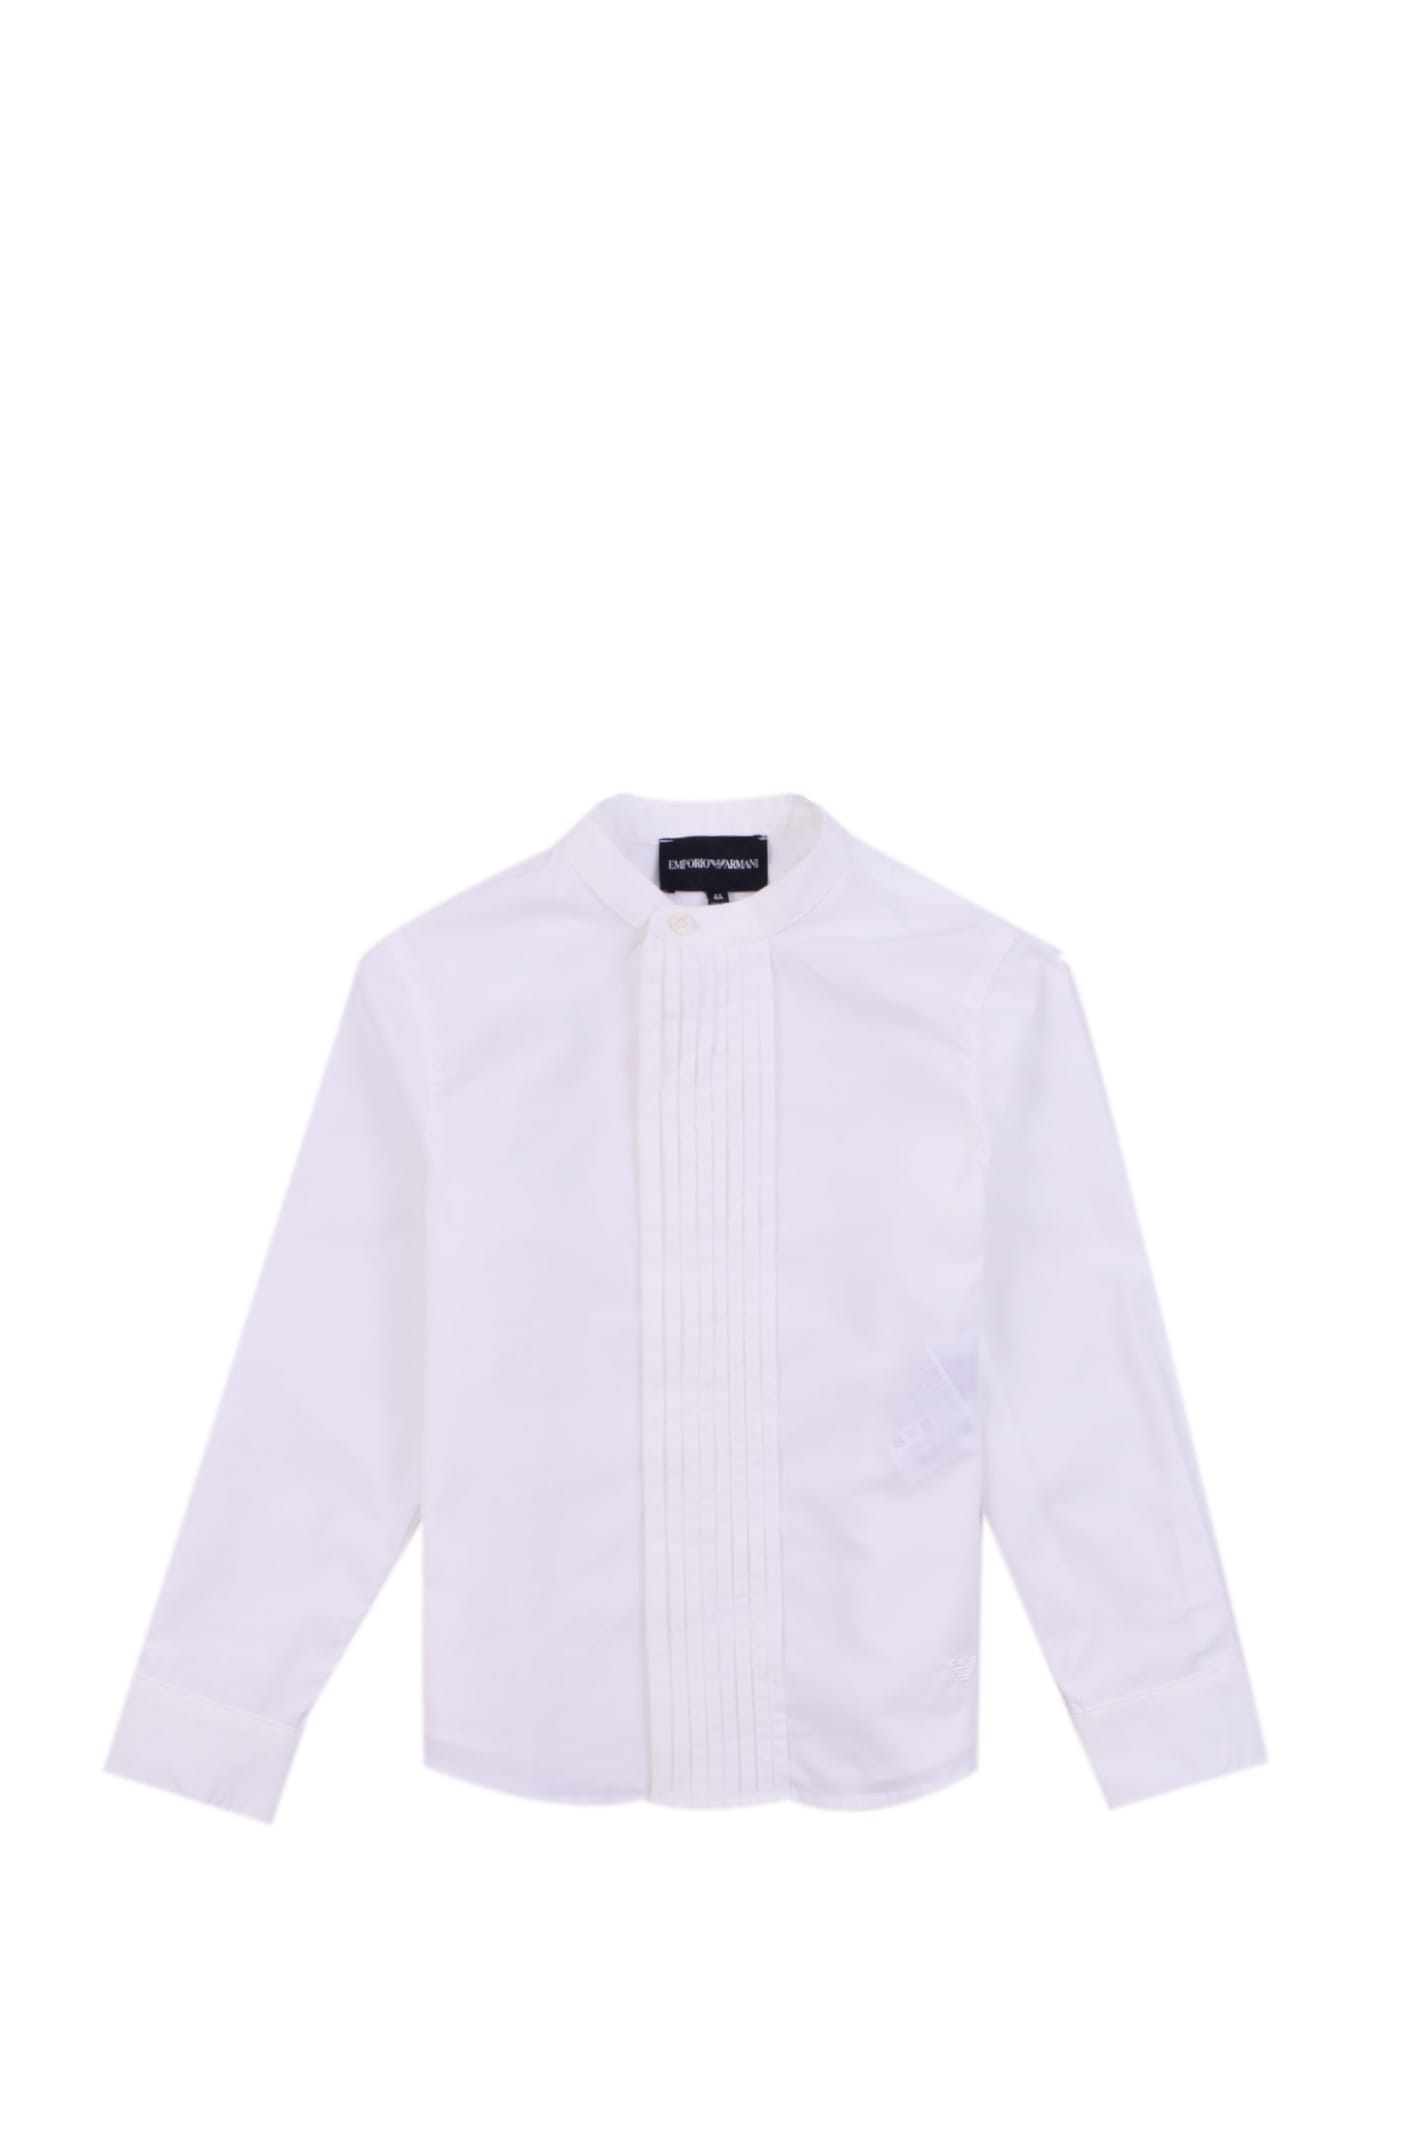 Emporio Armani Kids' Shirt With Pleated Detail In White